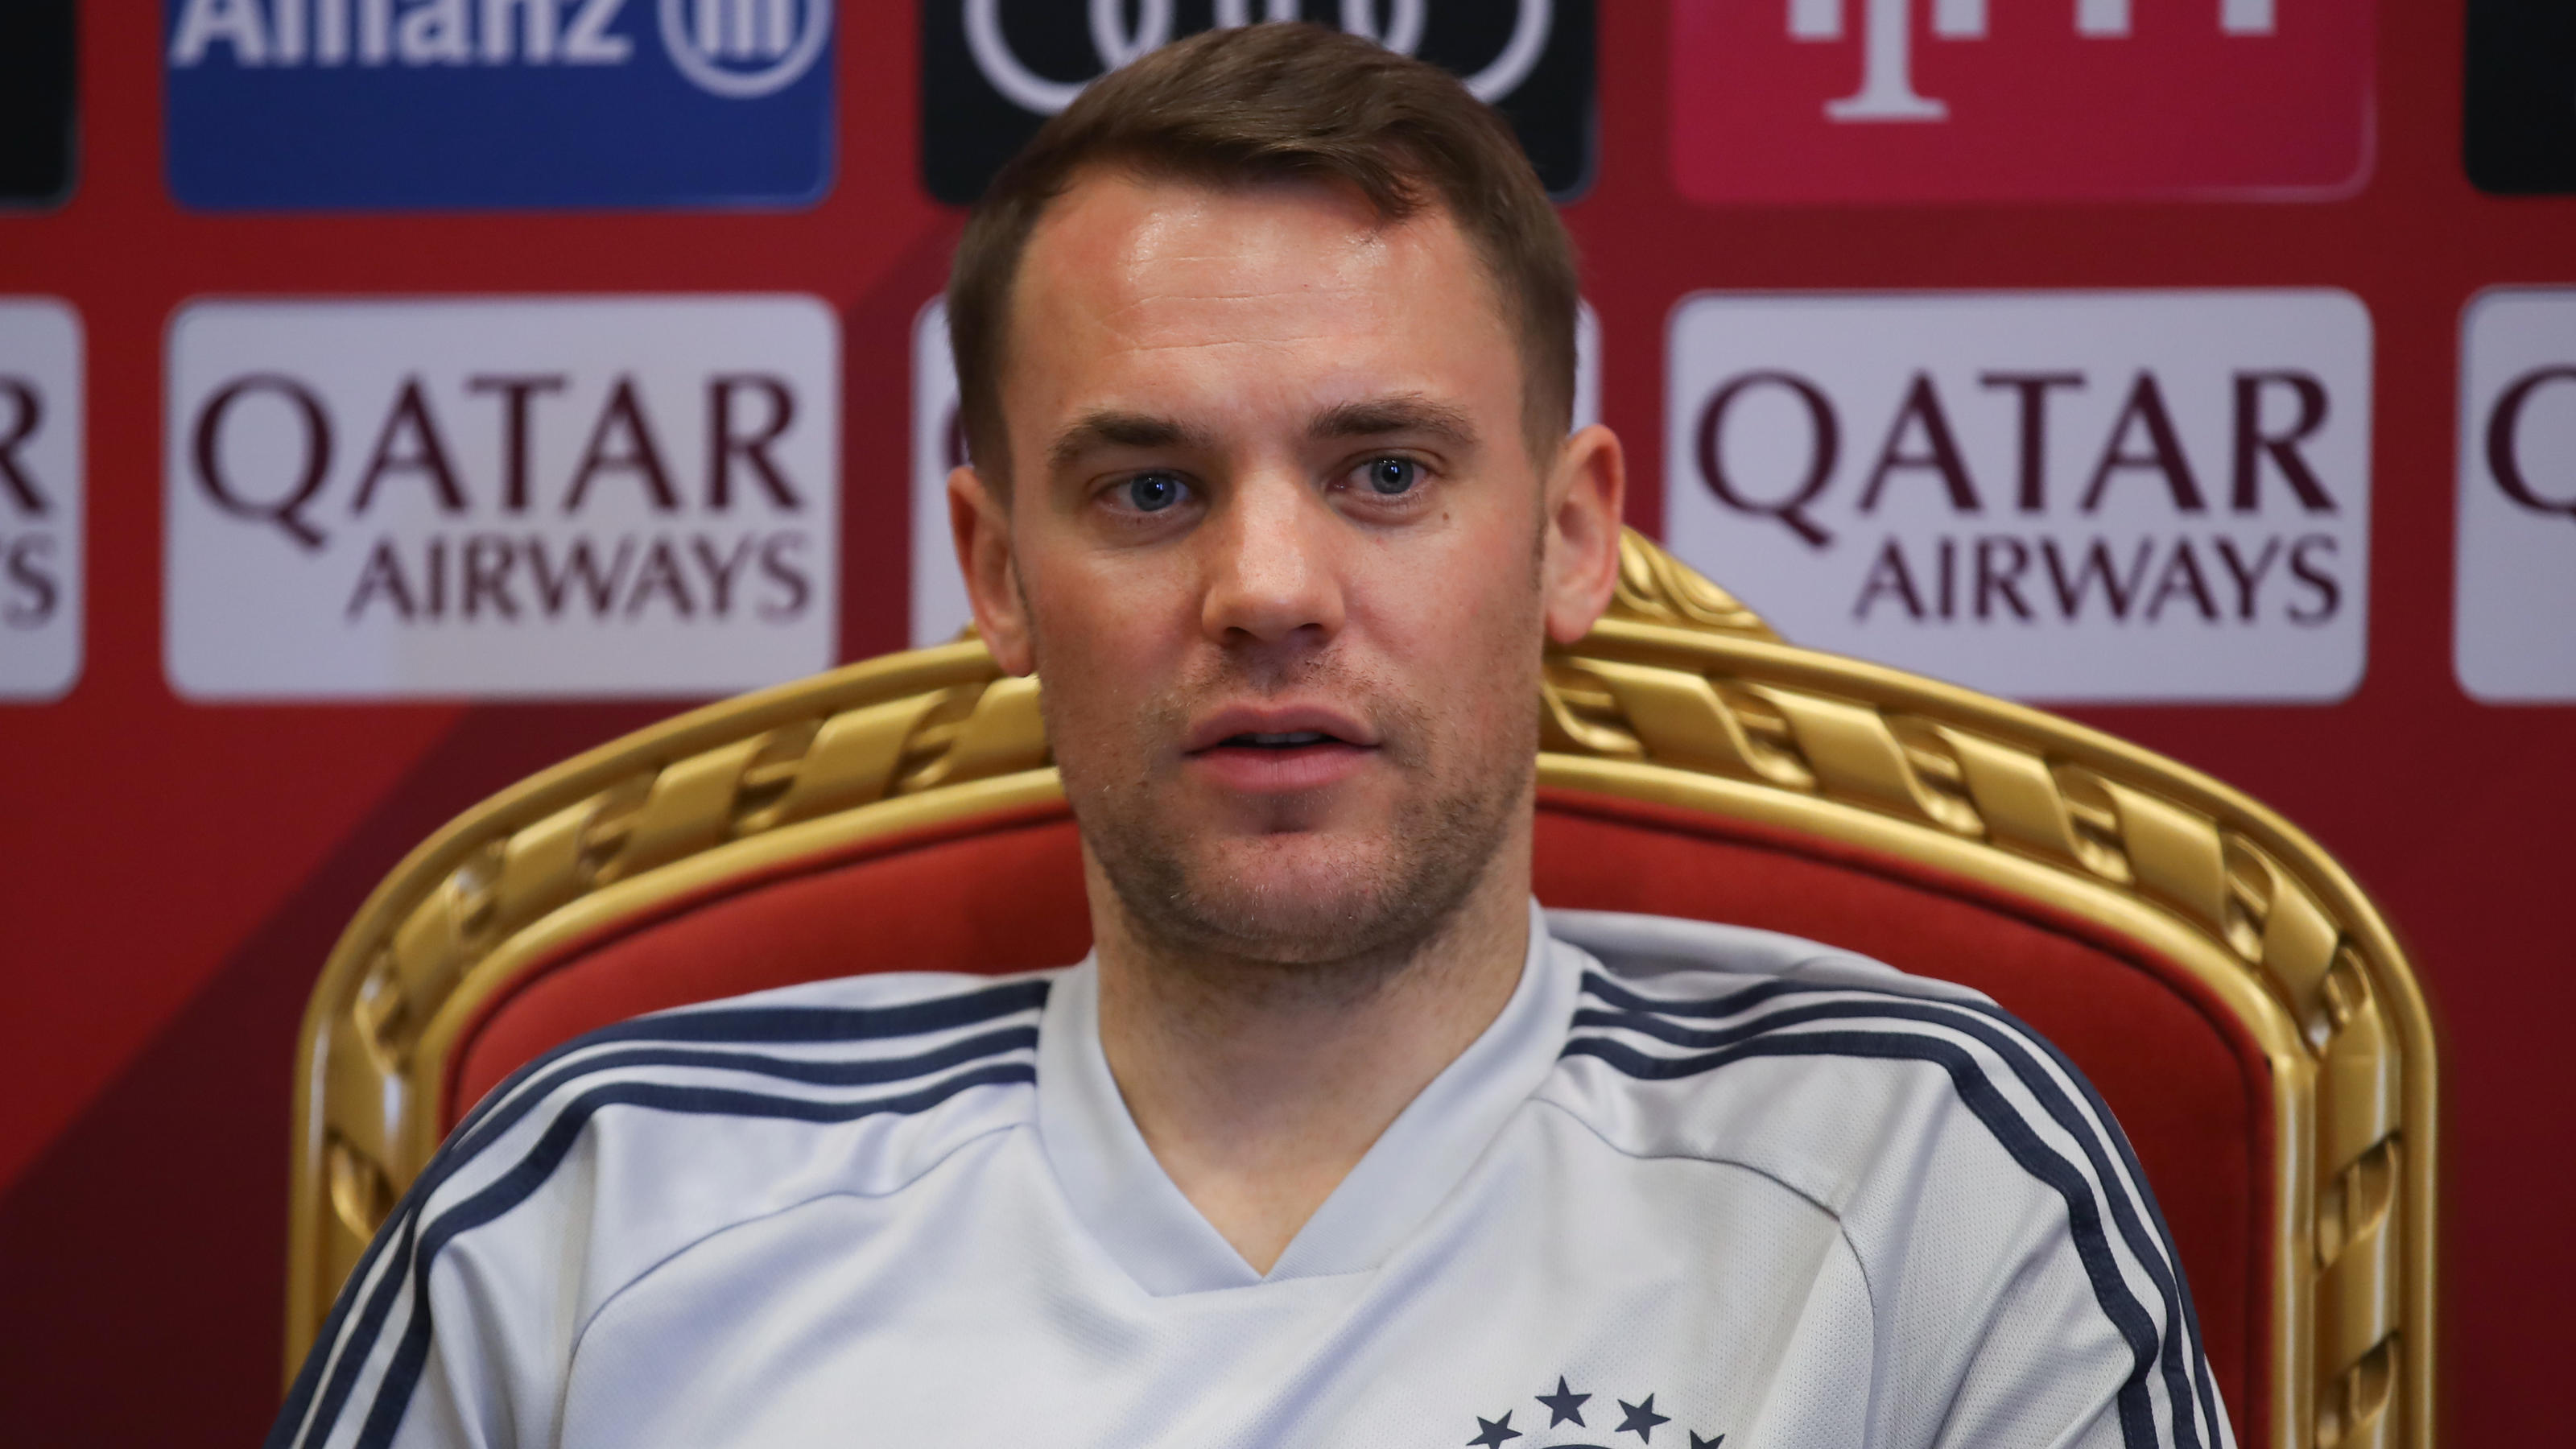 DOHA, QATAR - JANUARY 06: Manuel Neuer talks to journalists during a press conference on day three of the FC Bayern Muenchen winter training camp at Al Aziziyah Boutique Hotel on January 06, 2020 in Doha, Qatar. (Photo by Alex Grimm/Bongarts/Getty Im